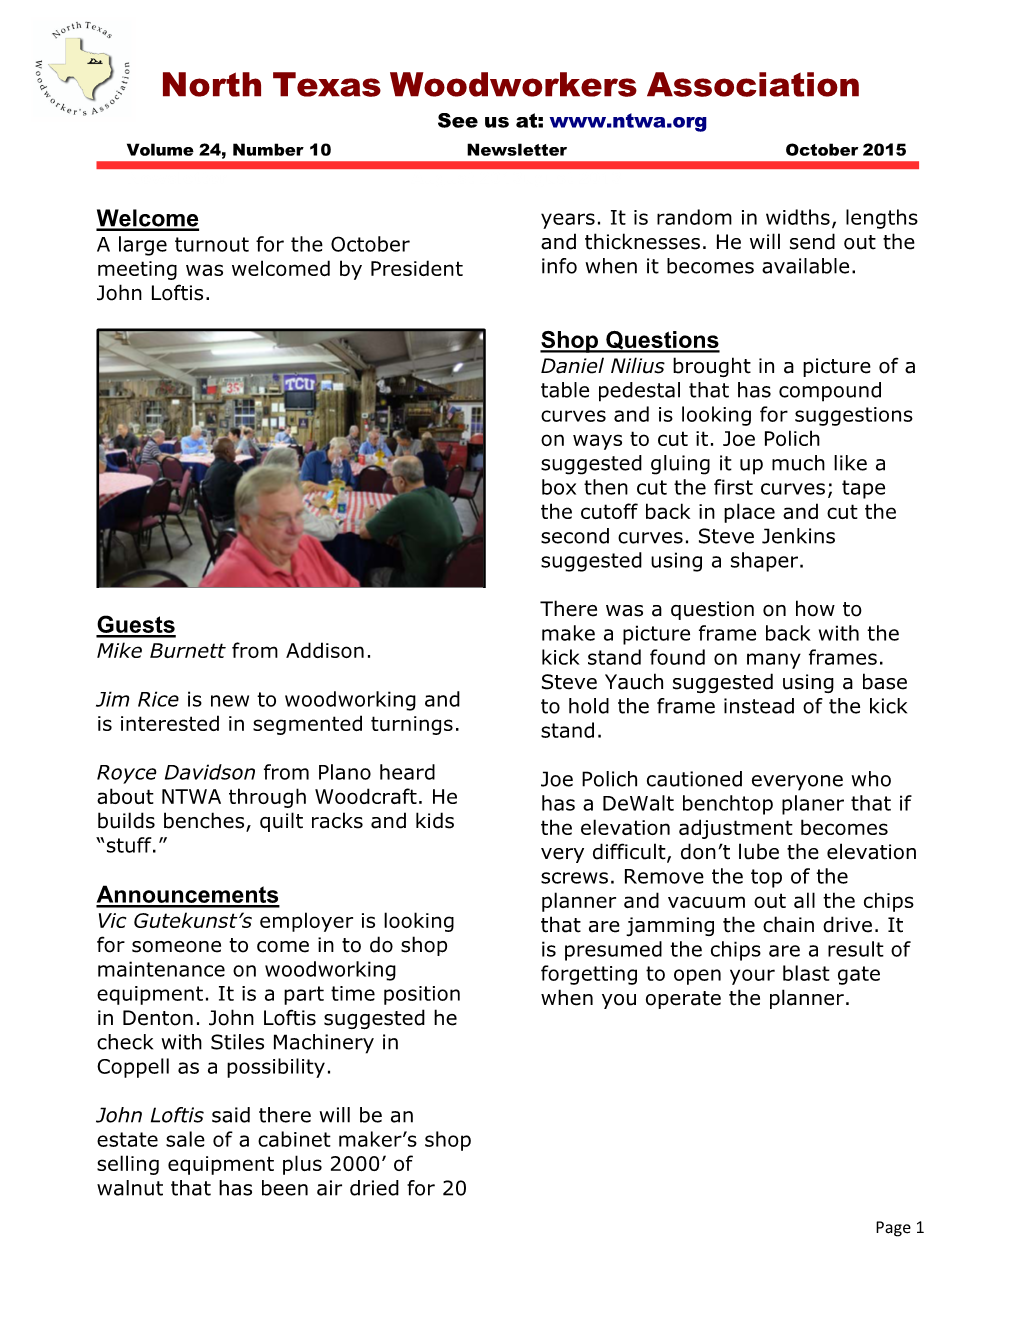 Newsletter October 2015 Newsletter August 2013Ugust 2013 Welcome Years